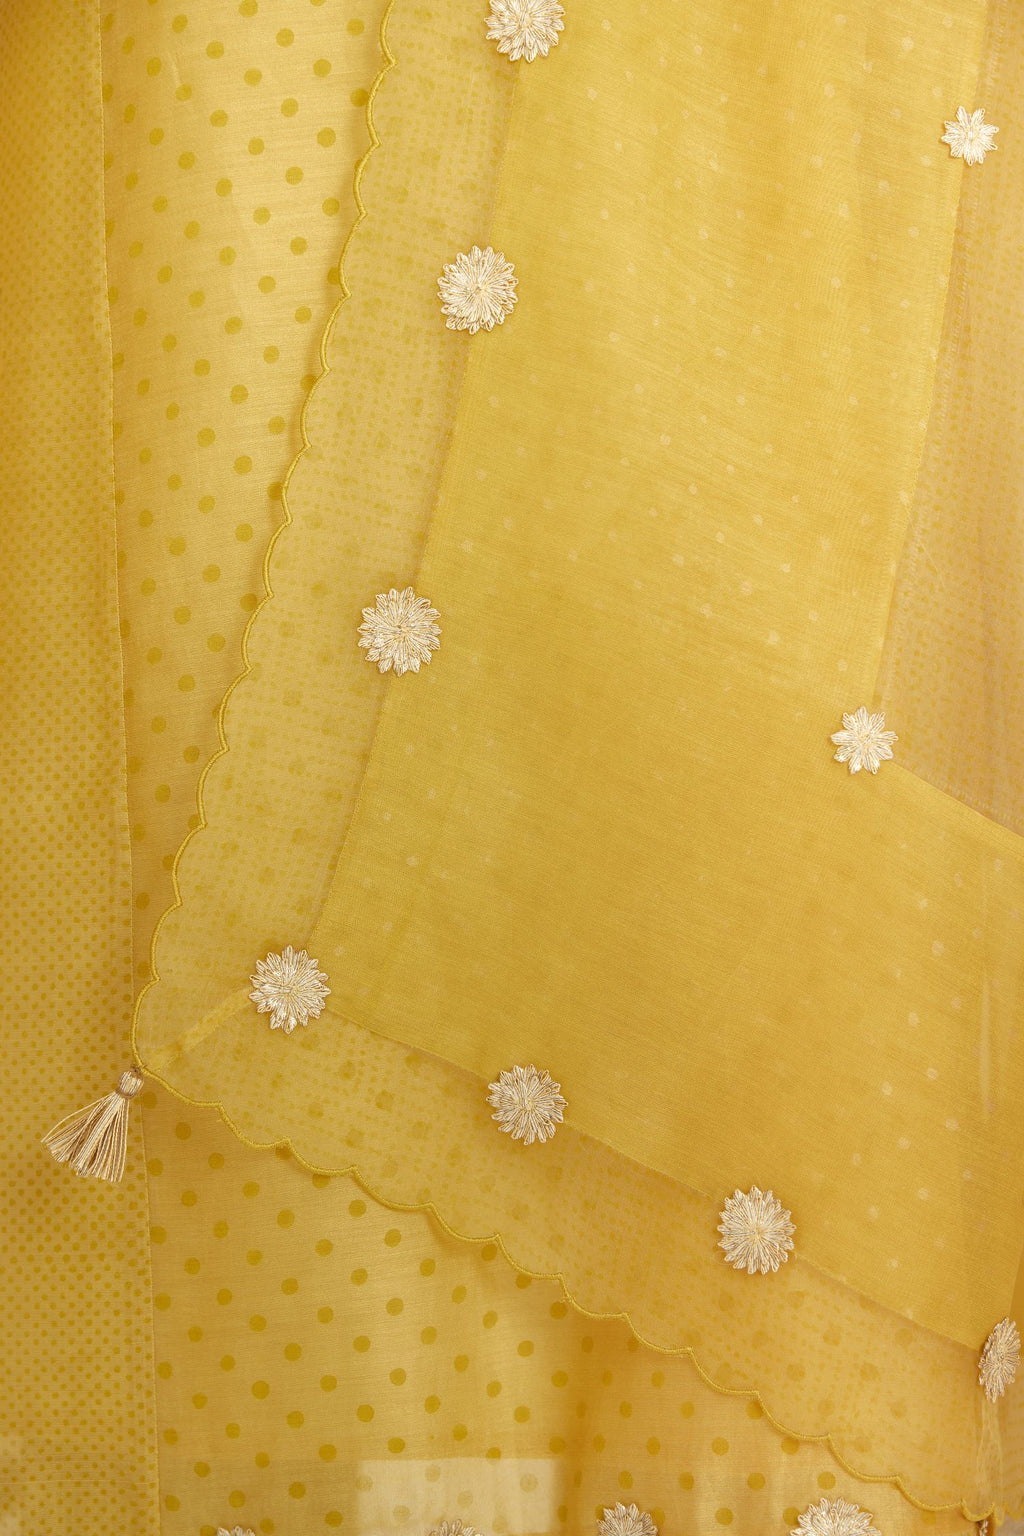 Yellow hand block printed silk chanderi kurta set with concealed button placket neckline, Highlighted with gota flower and scalloped organza at edges